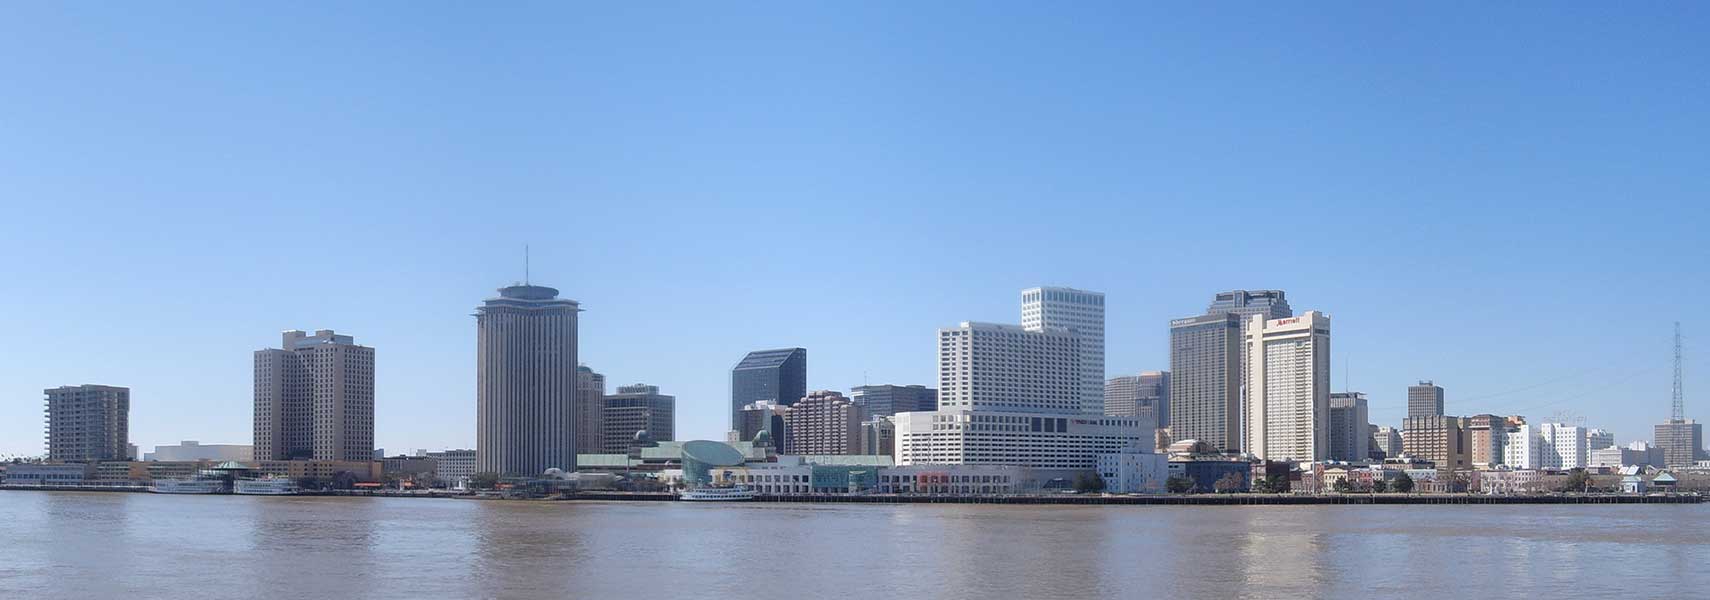 Panorama of Downtown New Orleans, Louisiana, USA